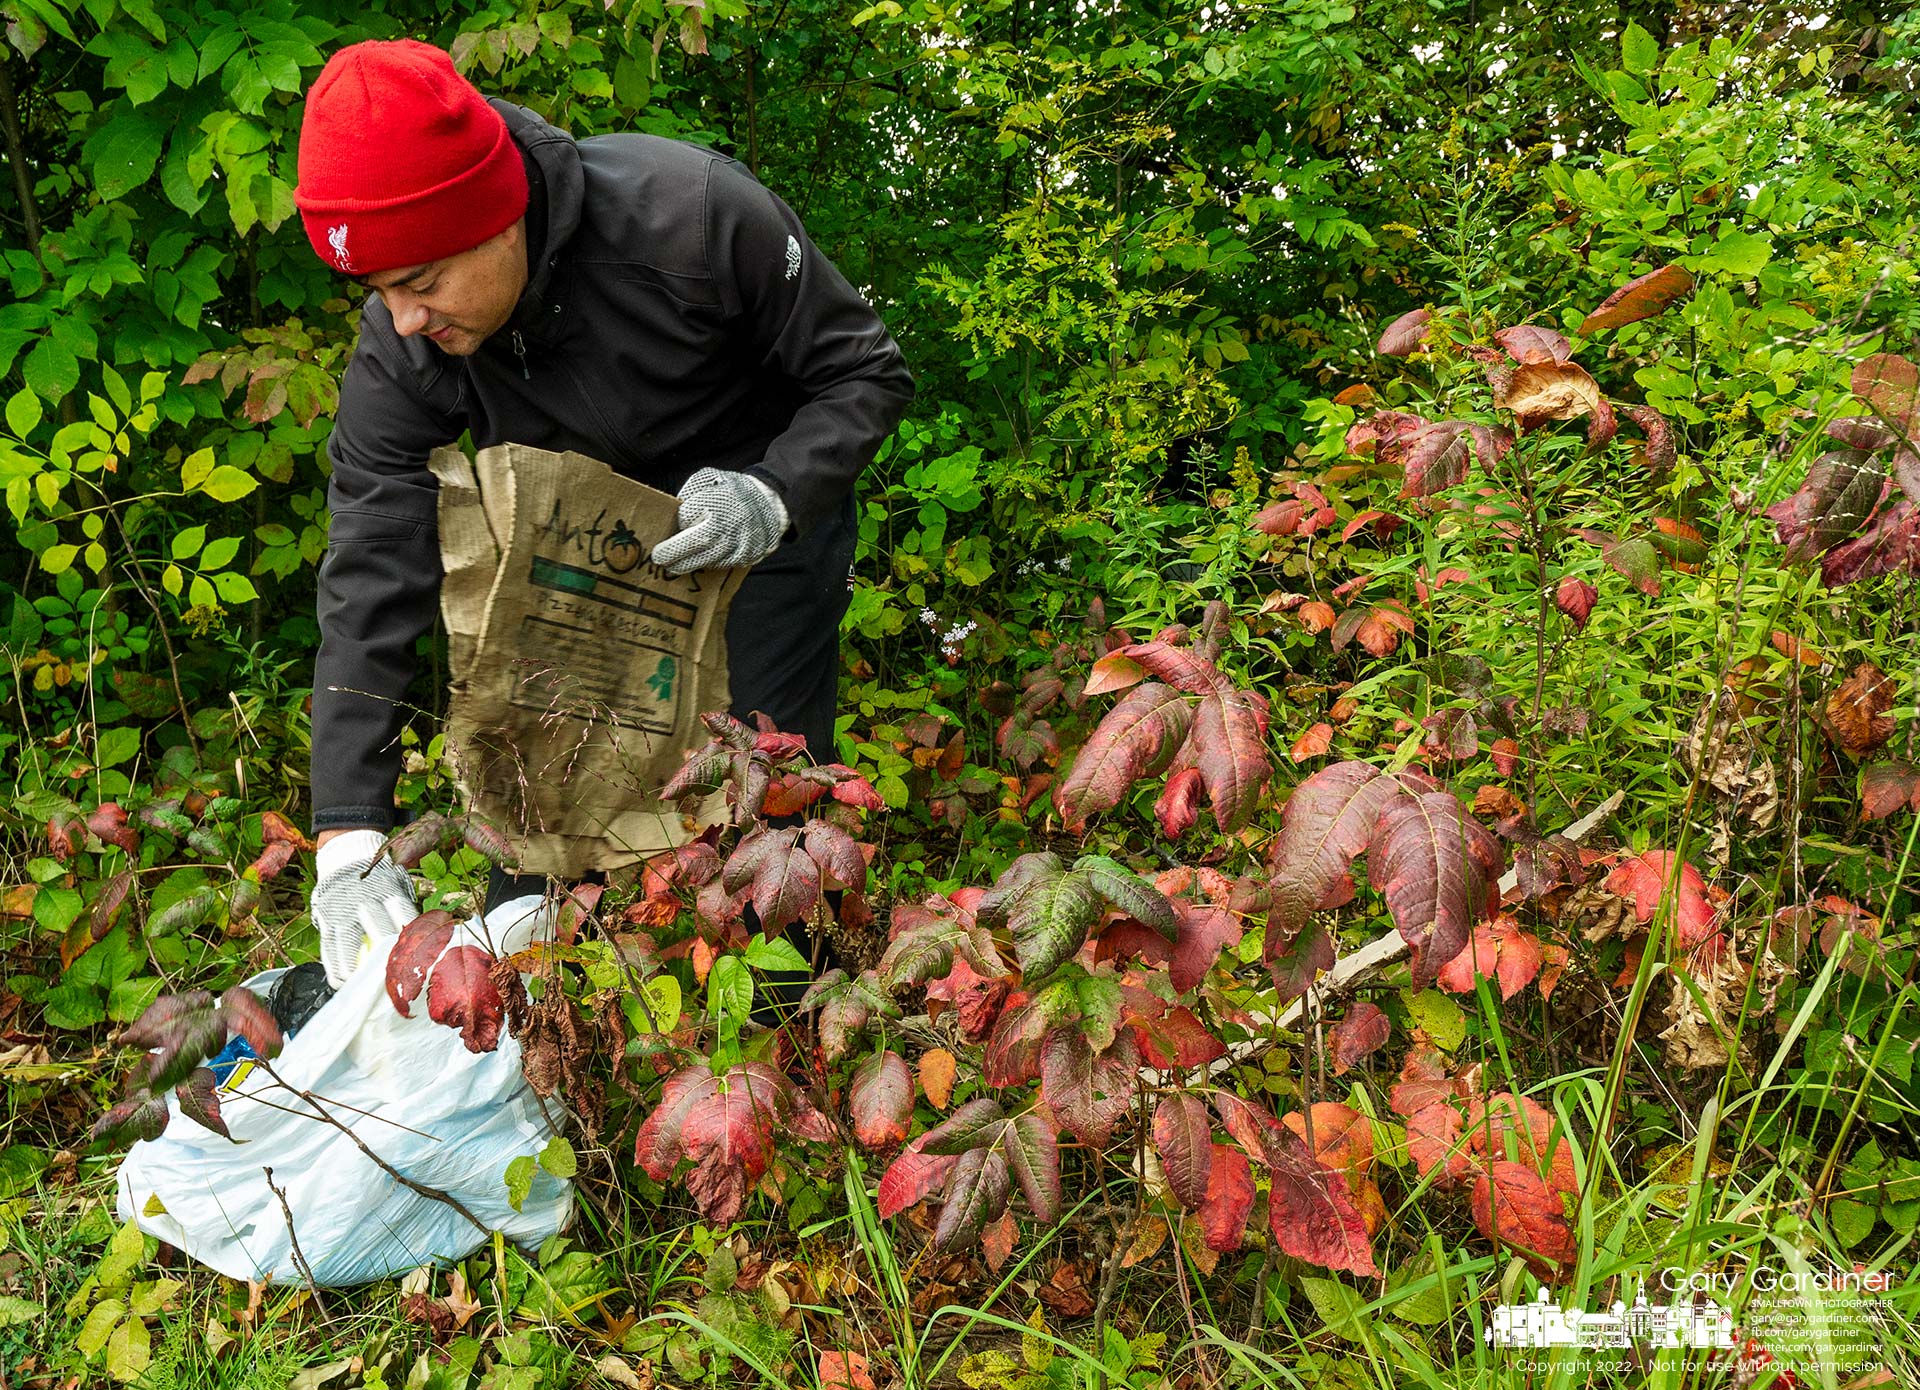 A volunteer working to clean trash and debris from the shores of Hoover Reservoir pulls garbage from a stand of poison ivy growing at Red Bank Park. My Final Photo for October 1, 2022.